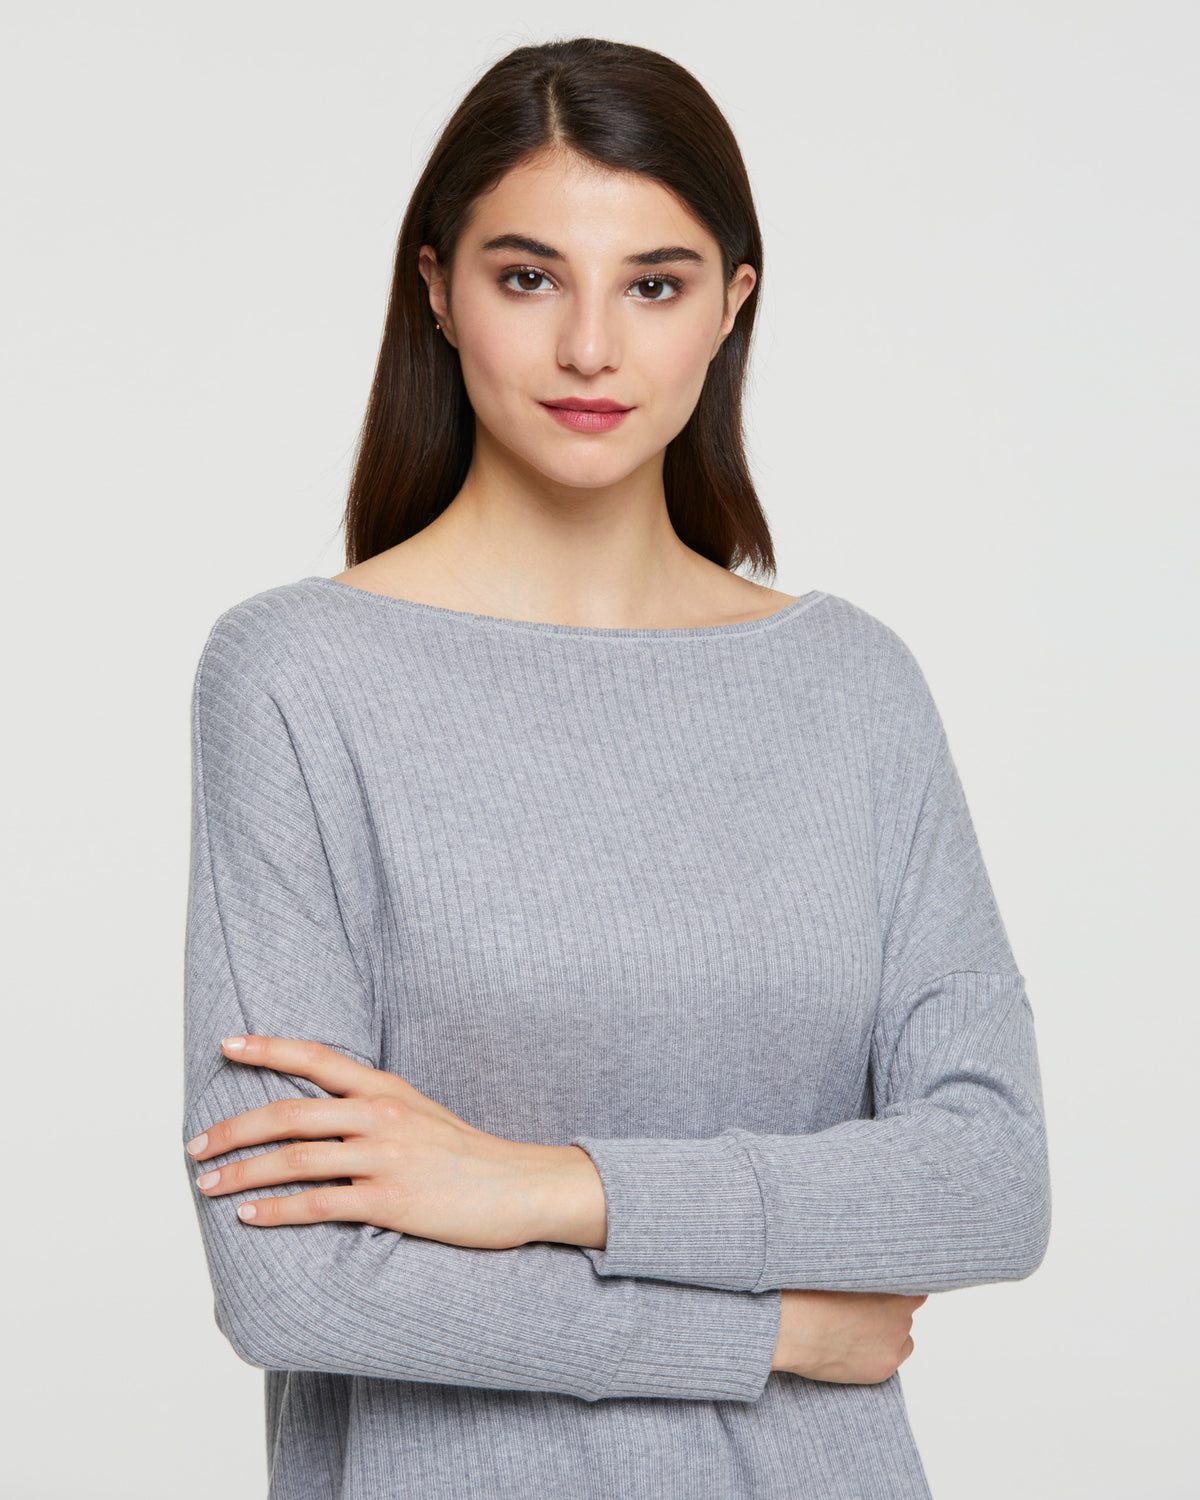 WOMEN’S RIBBED TOP WITH CREW NECK